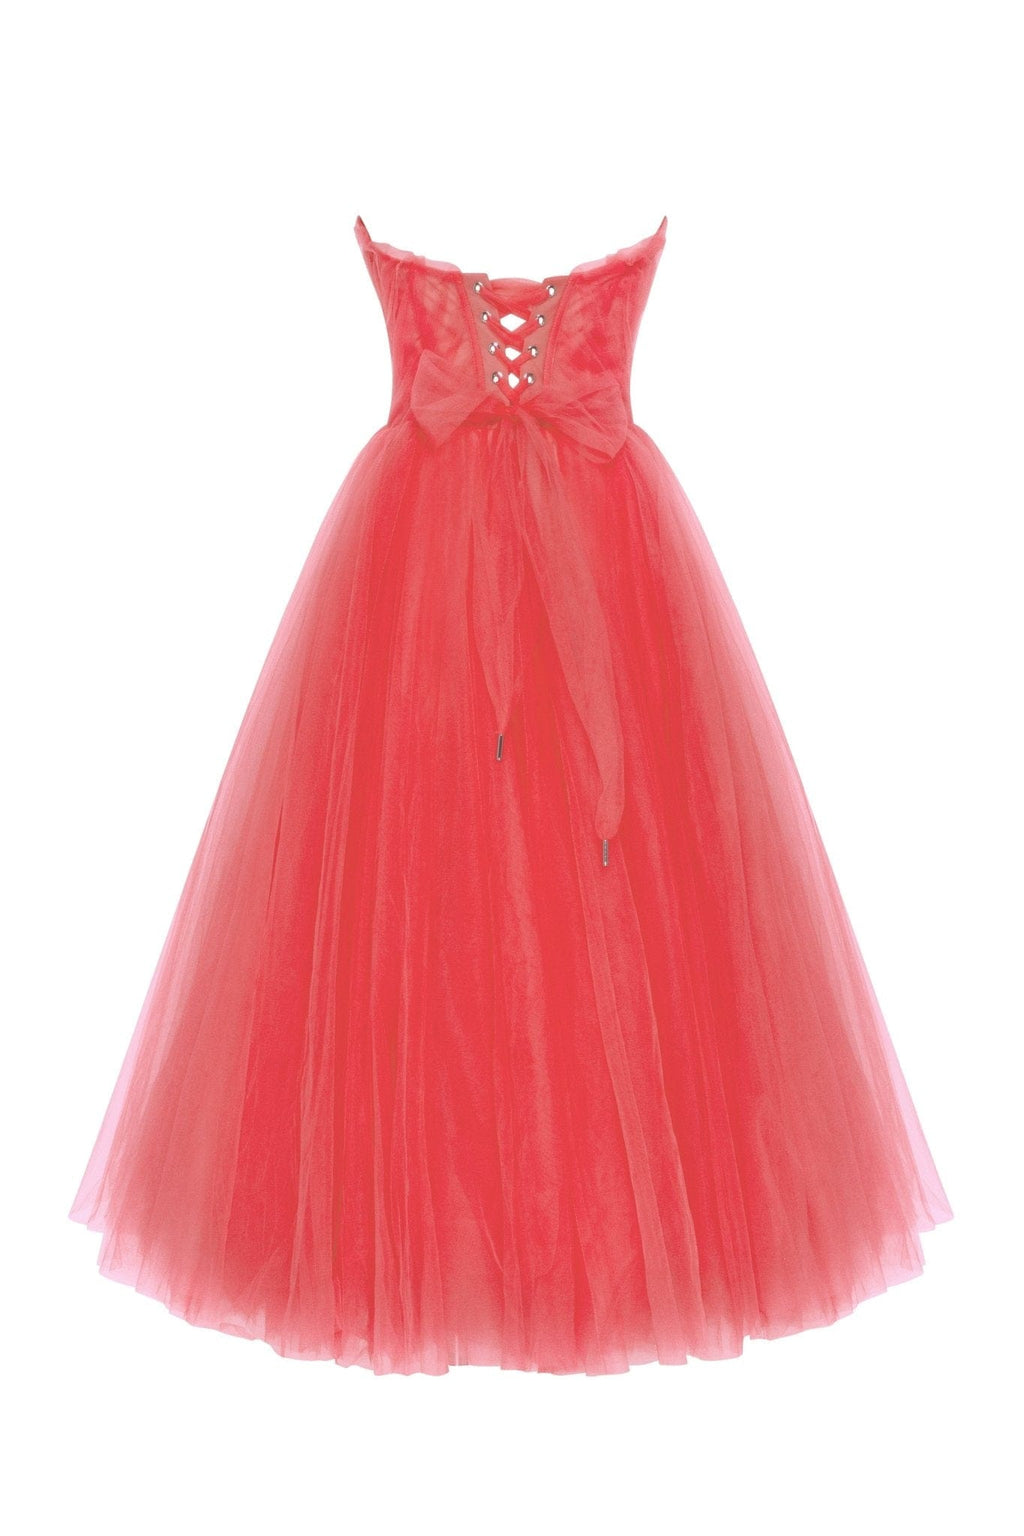 Coral tender midi tulle dress Milla Dresses - USA, Worldwide delivery